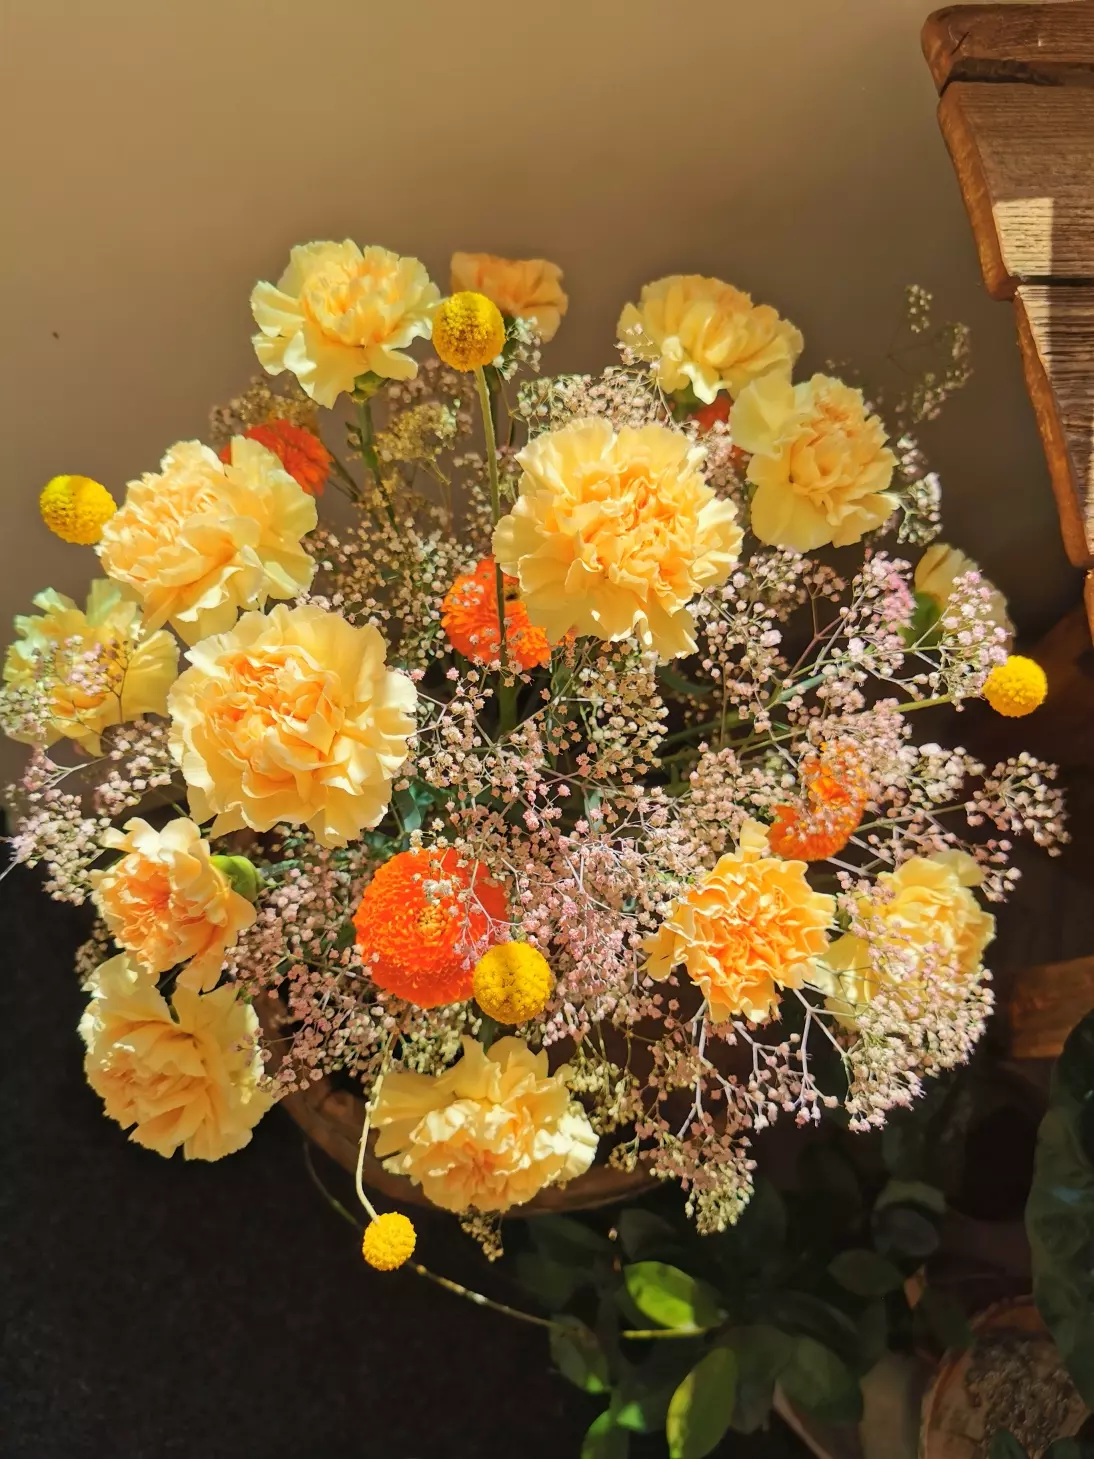 The sunshine bouquet is a radiant, energetic offering.